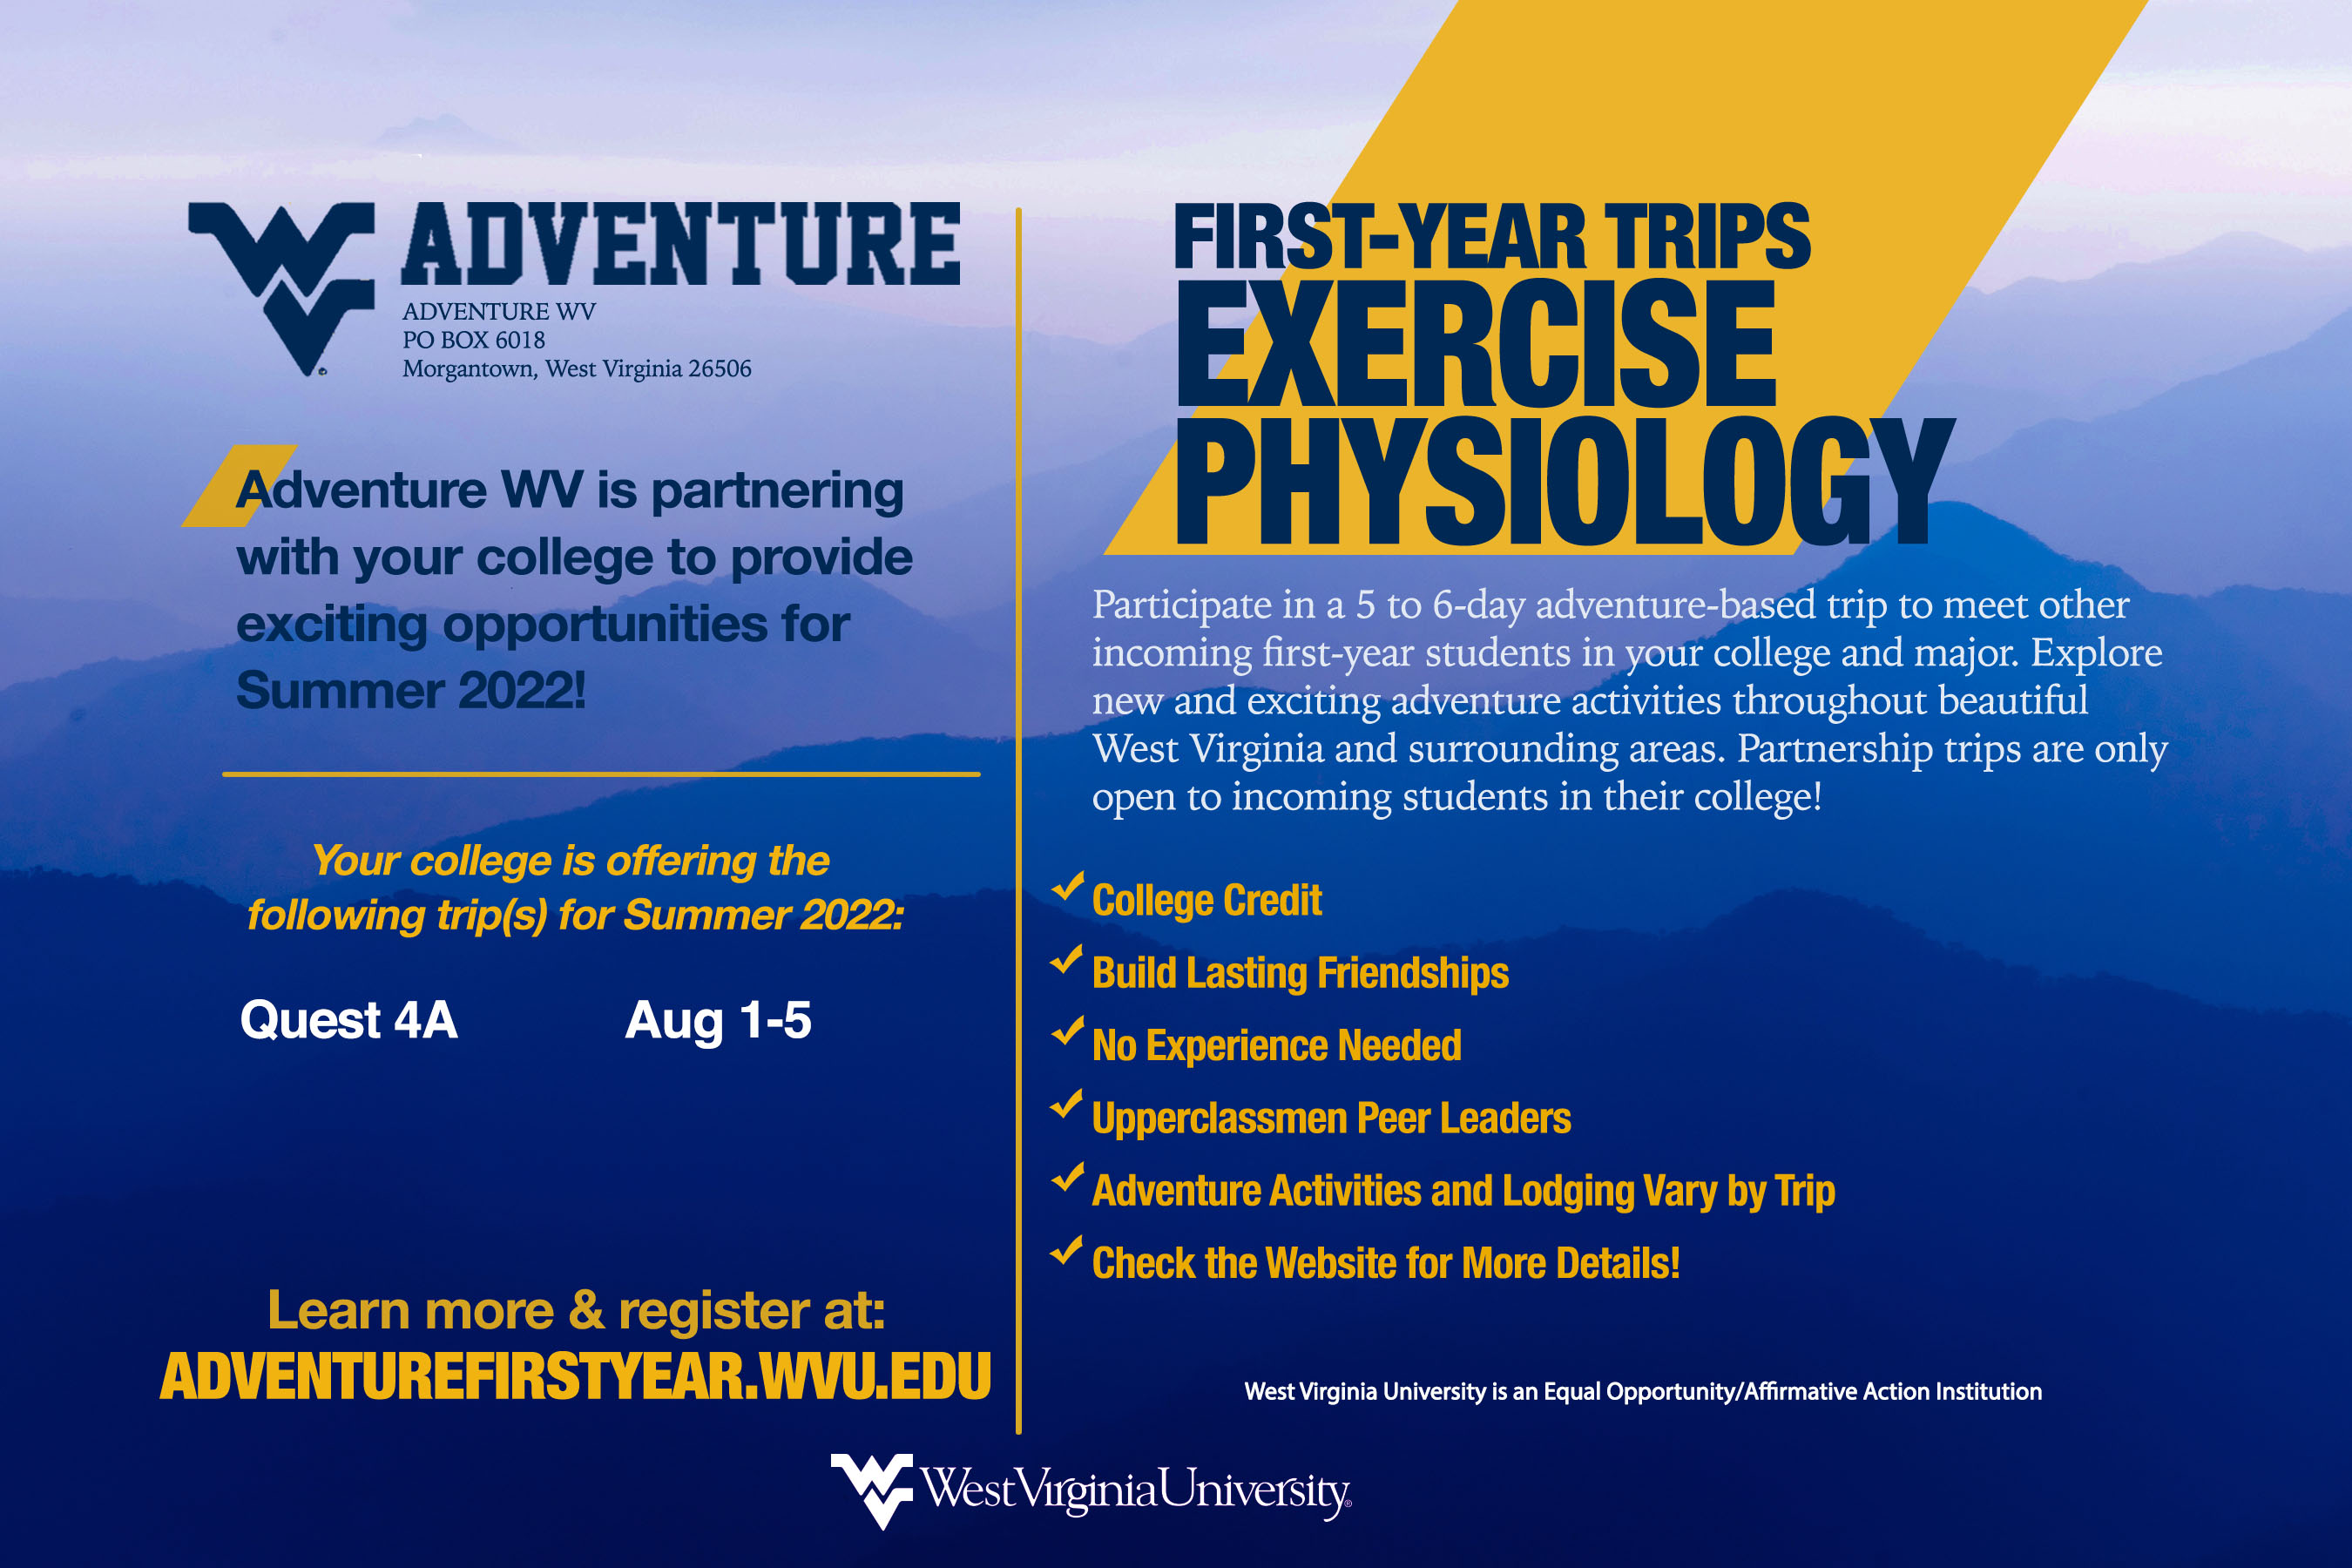 Back of Adventure WV flyer about first-year trips for Exercise Physiology students